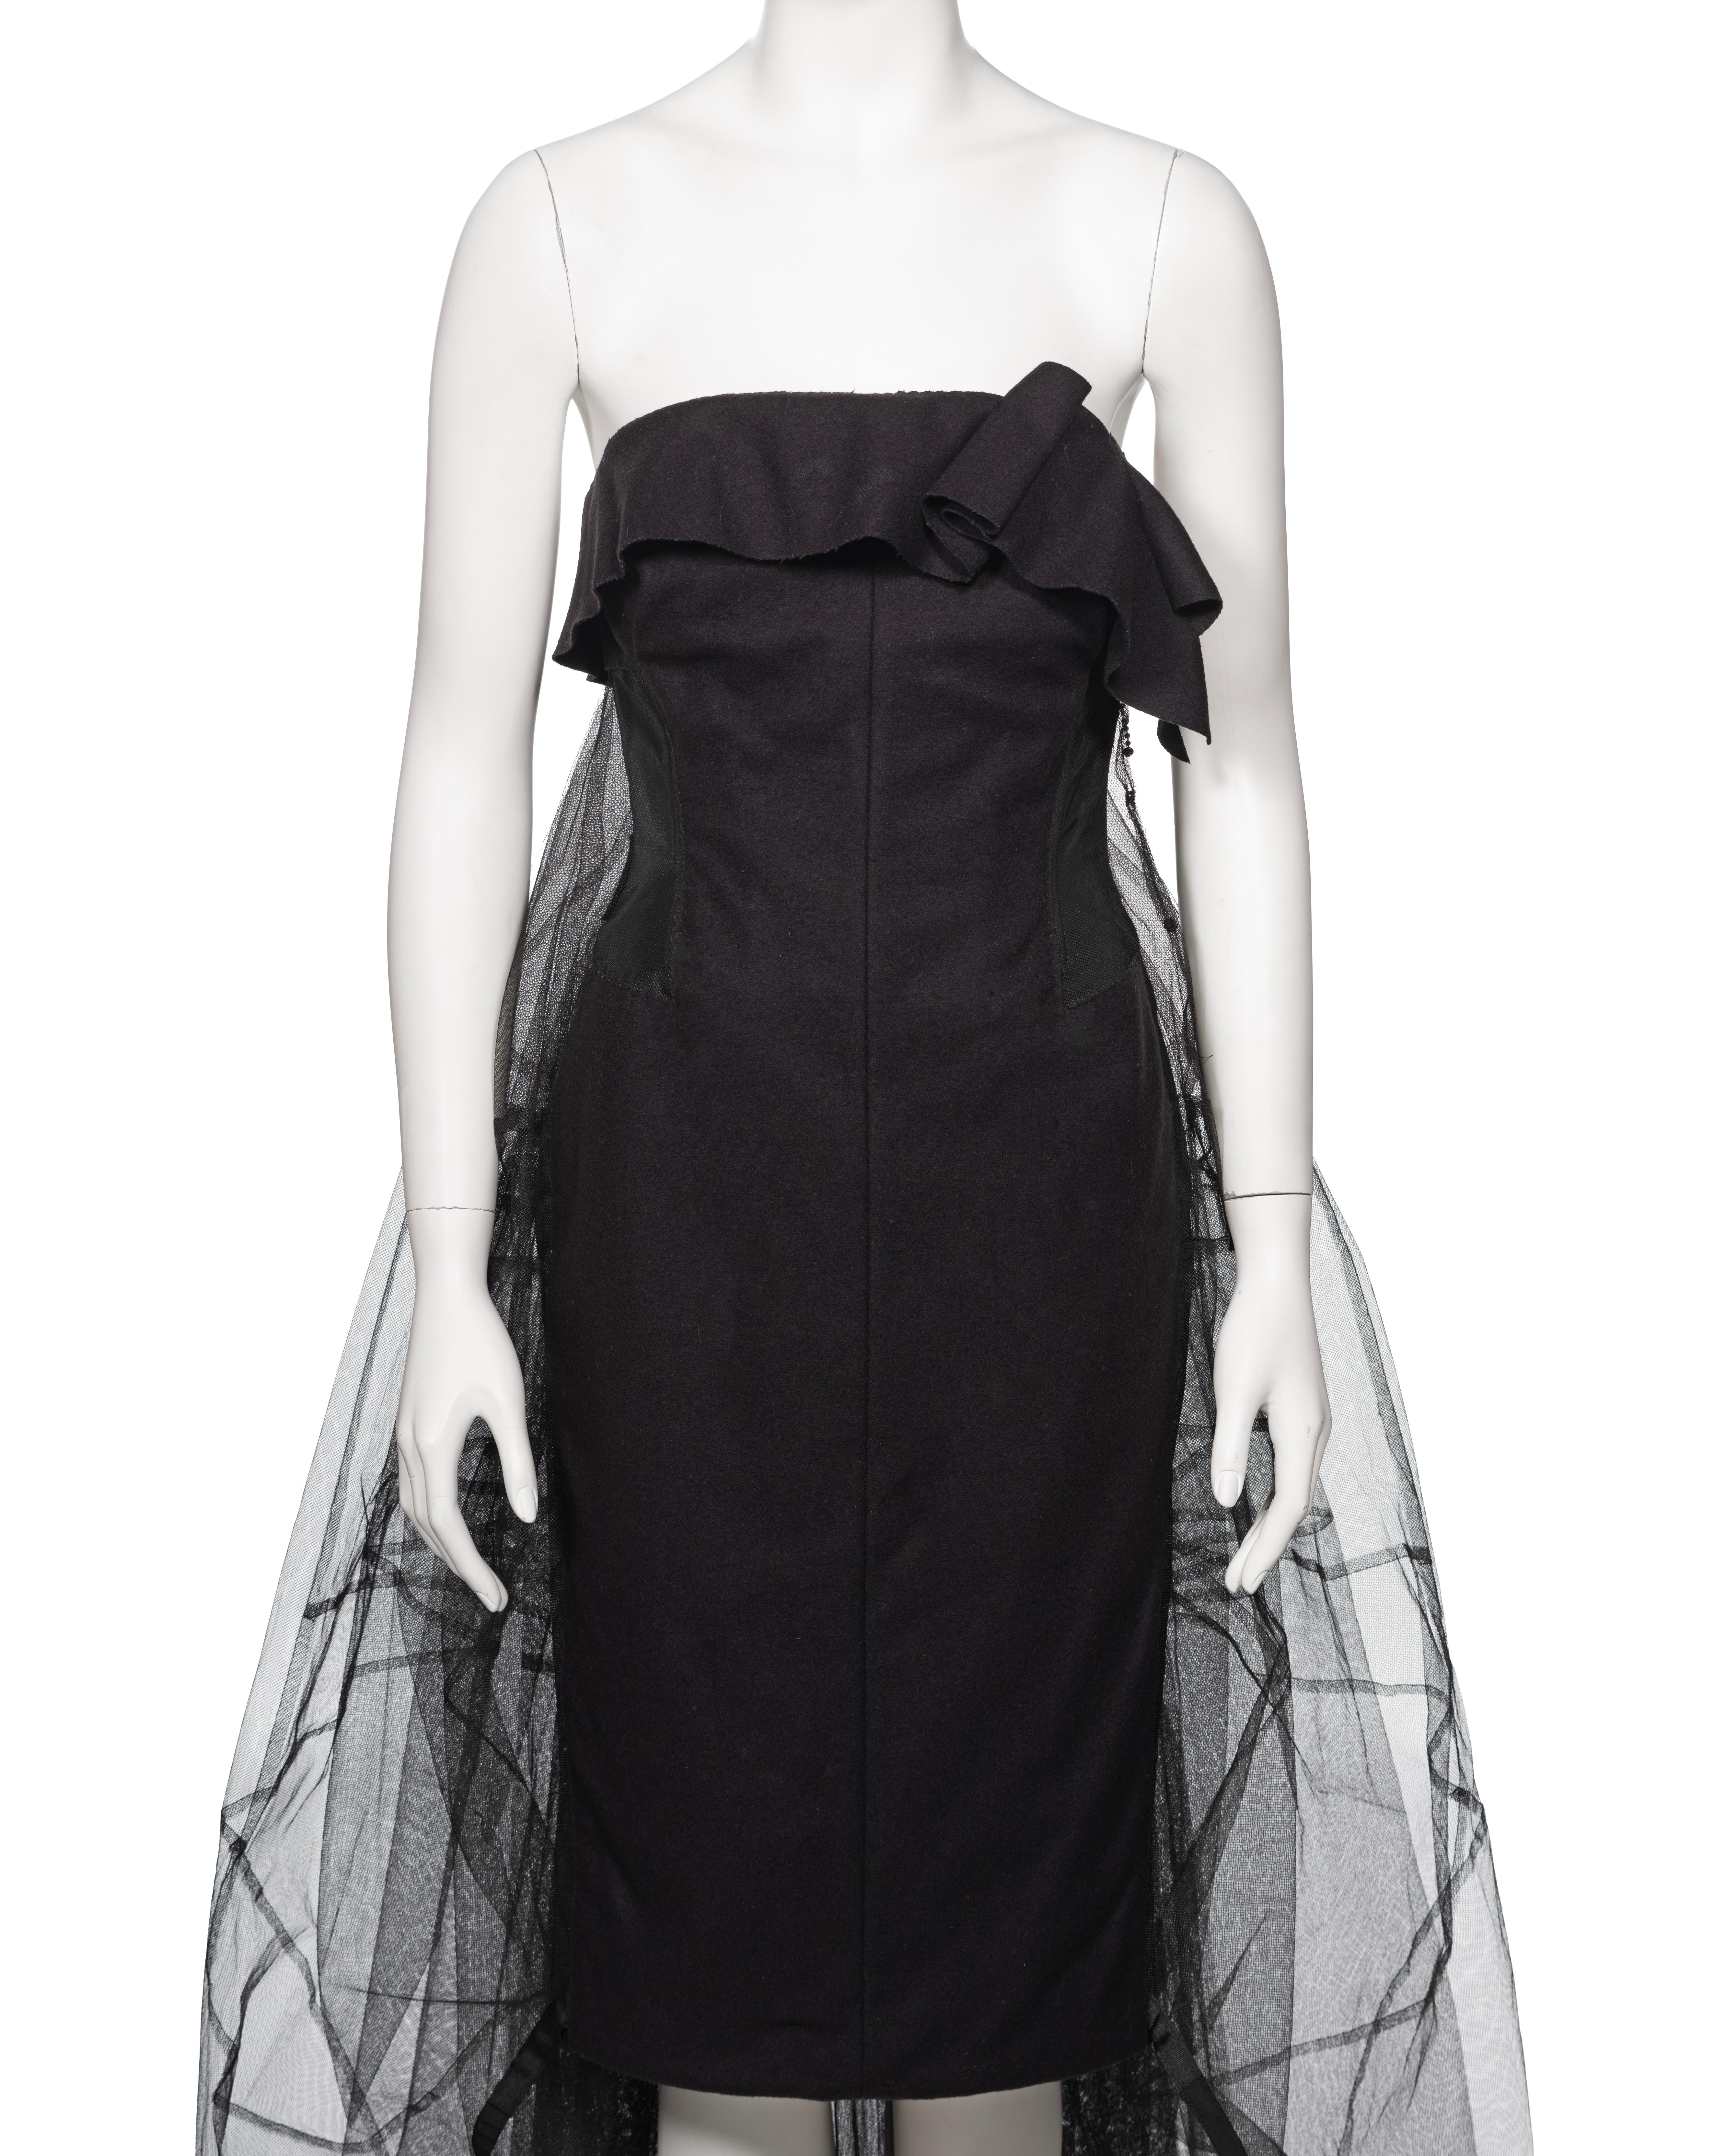 Women's Louis Vuitton by Marc Jacobs Black Wool Strapless Dress with Petticoat, fw 2008 For Sale